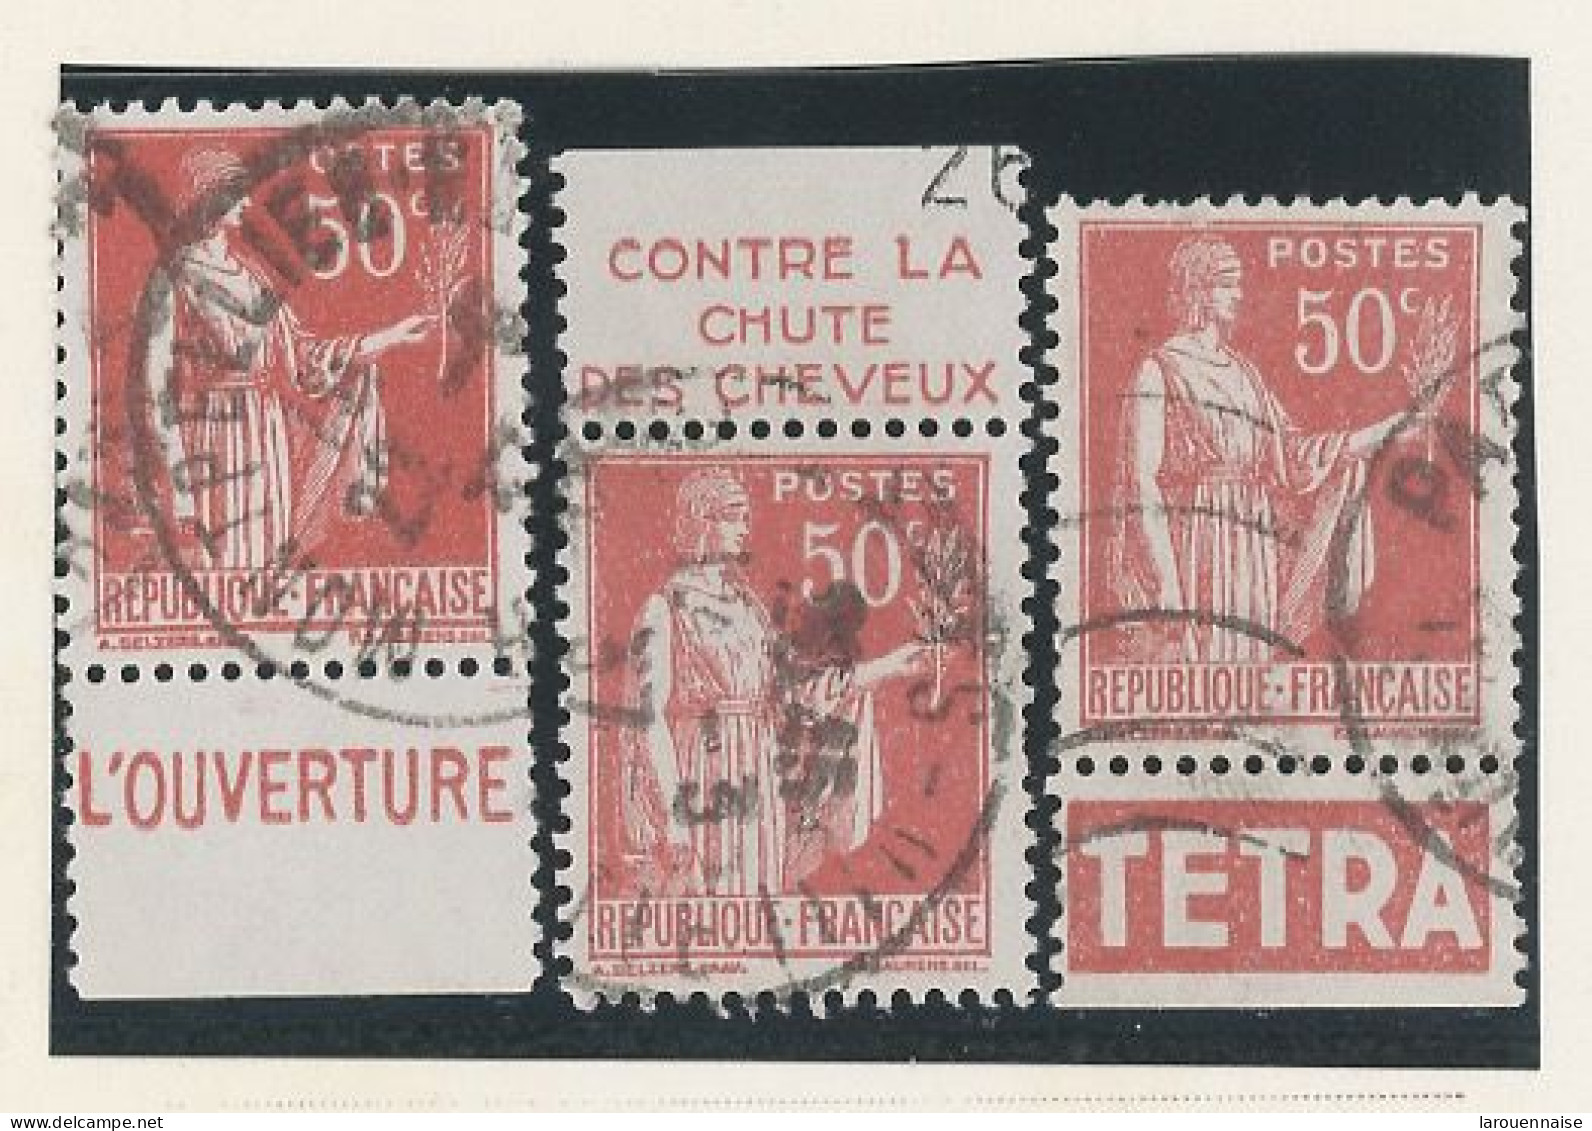 BANDE PUB -N°283  PAIX TYPE III -50c ROUGE -Obl - PUB -CCP - HAHN - TETRA - - Used Stamps